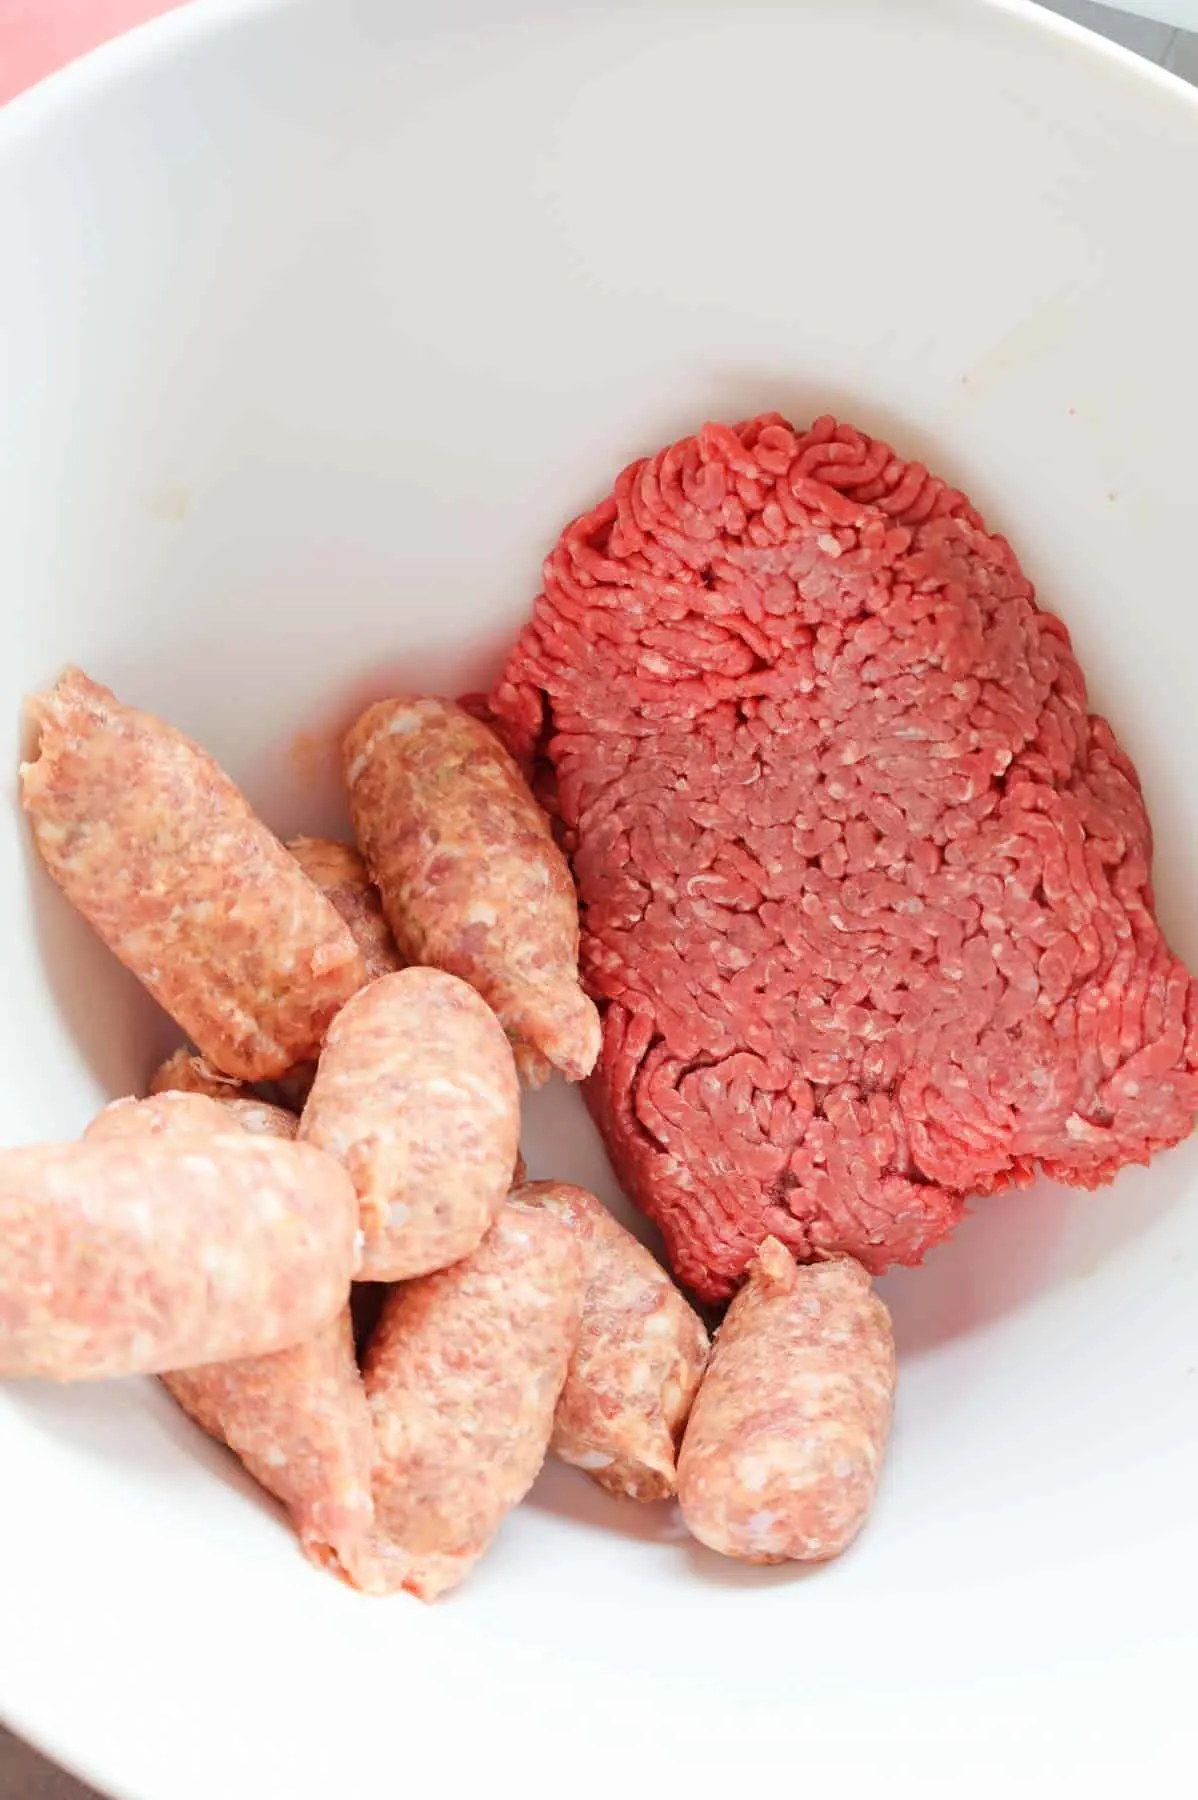 ground beef and Italian sausage meat in a mixing bowl